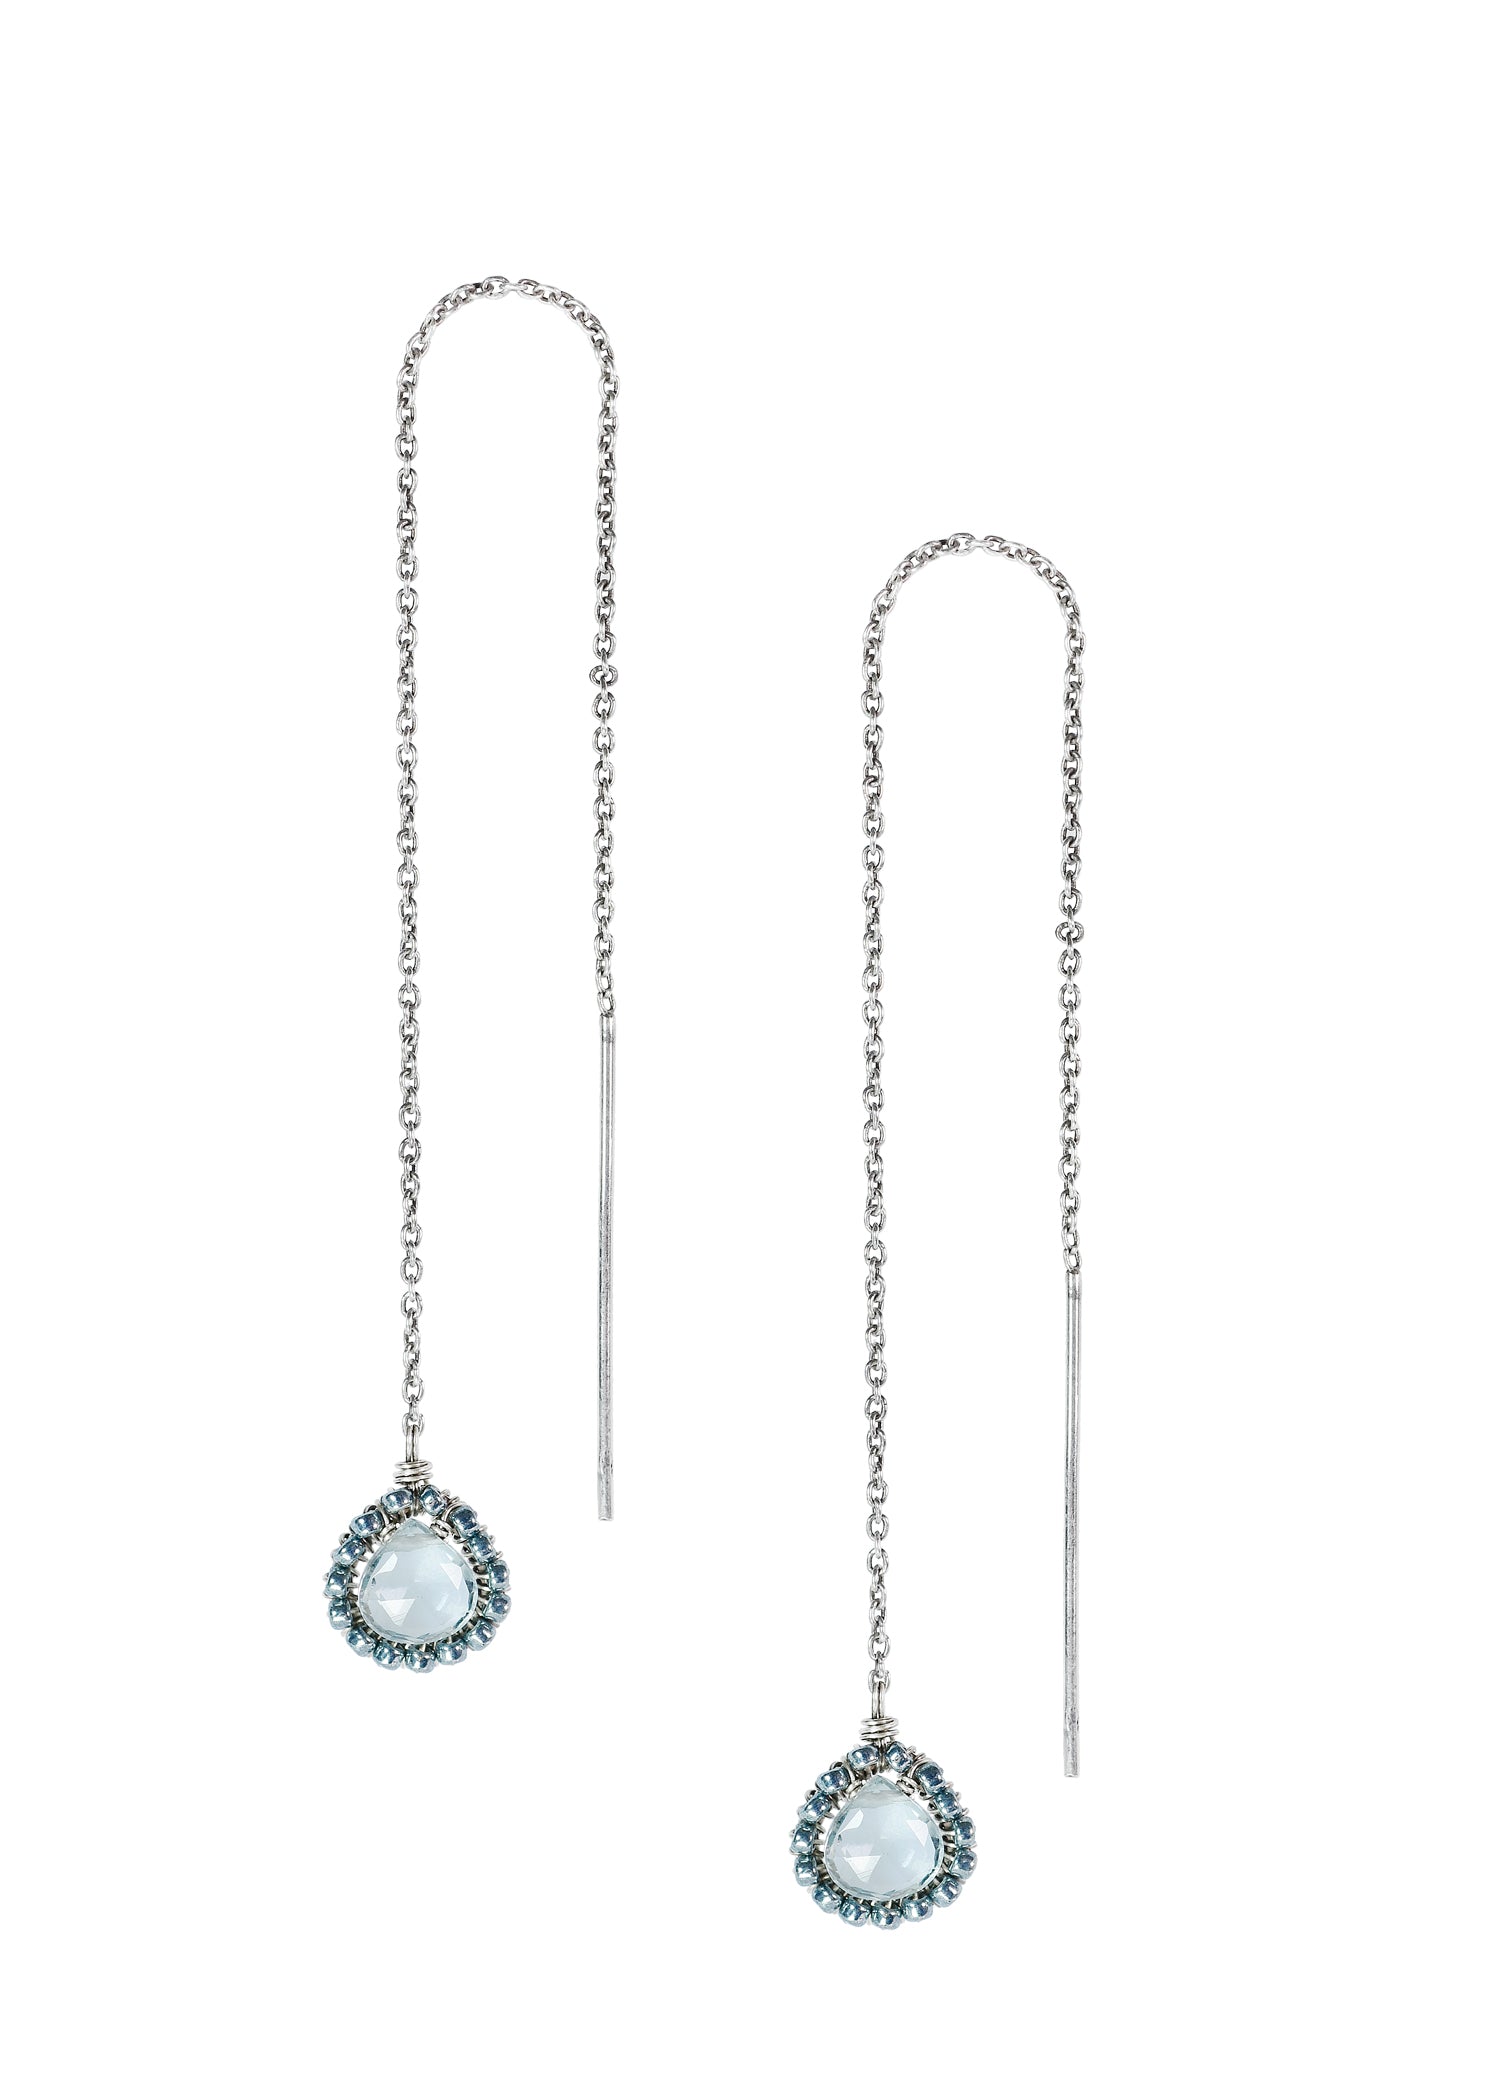 Aqua quartz Seed beads Sterling silver Earrings measure 5-1/4" in length and 3/8" in width across the widest point of the drop Handmade in our Los Angeles studio